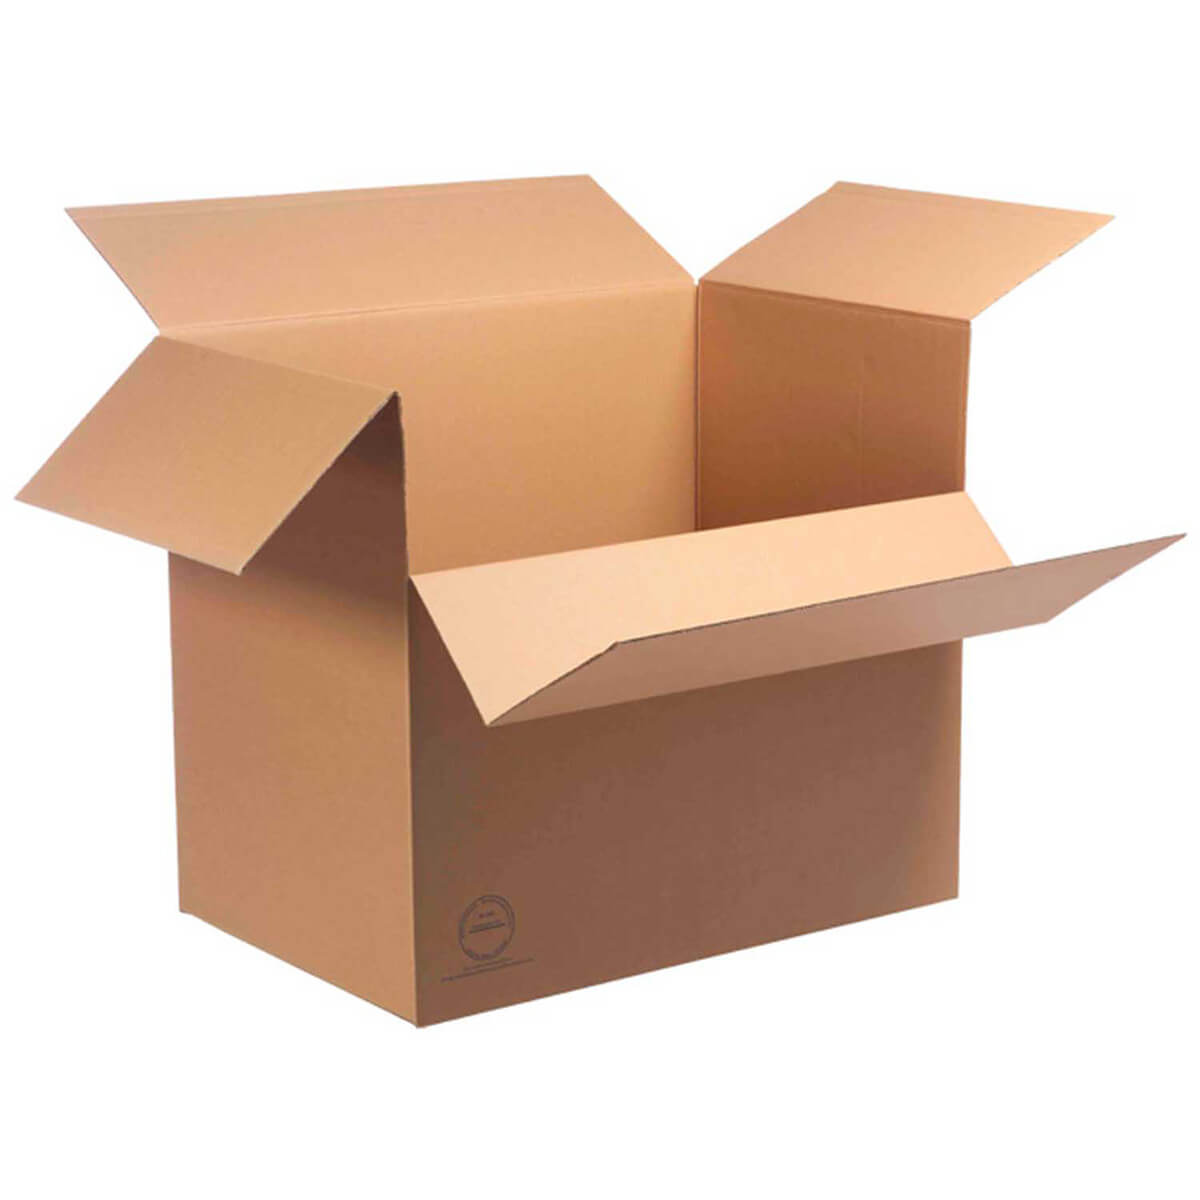 Double wall cardboard container 1200 x 800 x 1000 mm